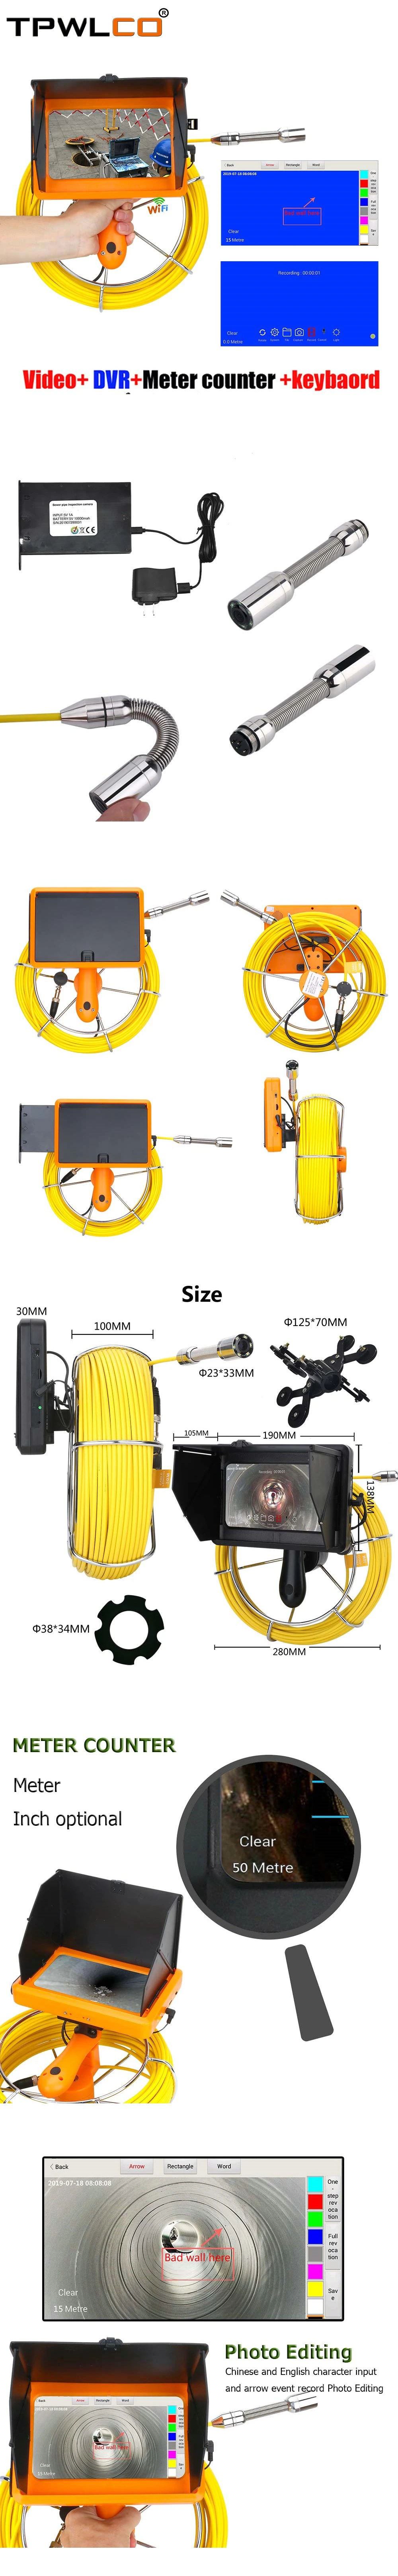 20m CCTV Drain Pipe Inspection Camera Endoscope 23mm HD Lens Support Photo Editing